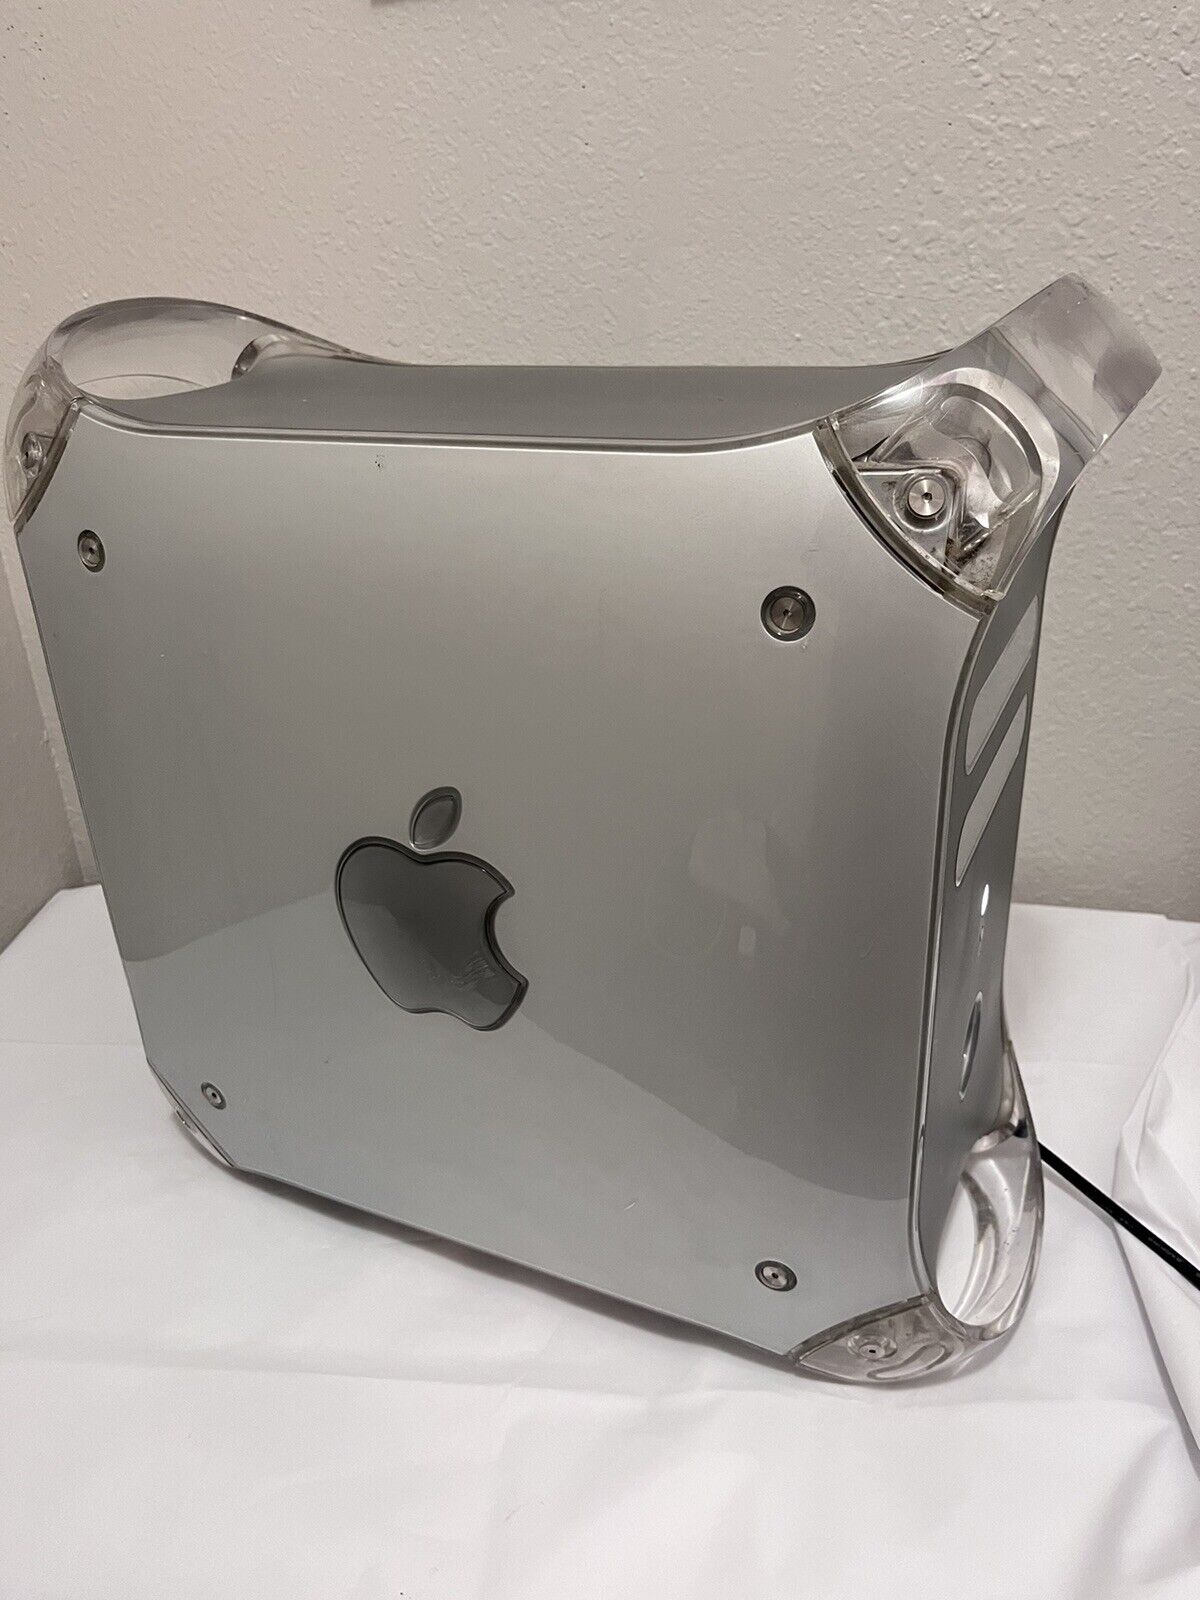 Apple Power Mac G4 M8493 Quicksilver HDD - TESTED - (Needs to Be Erased)